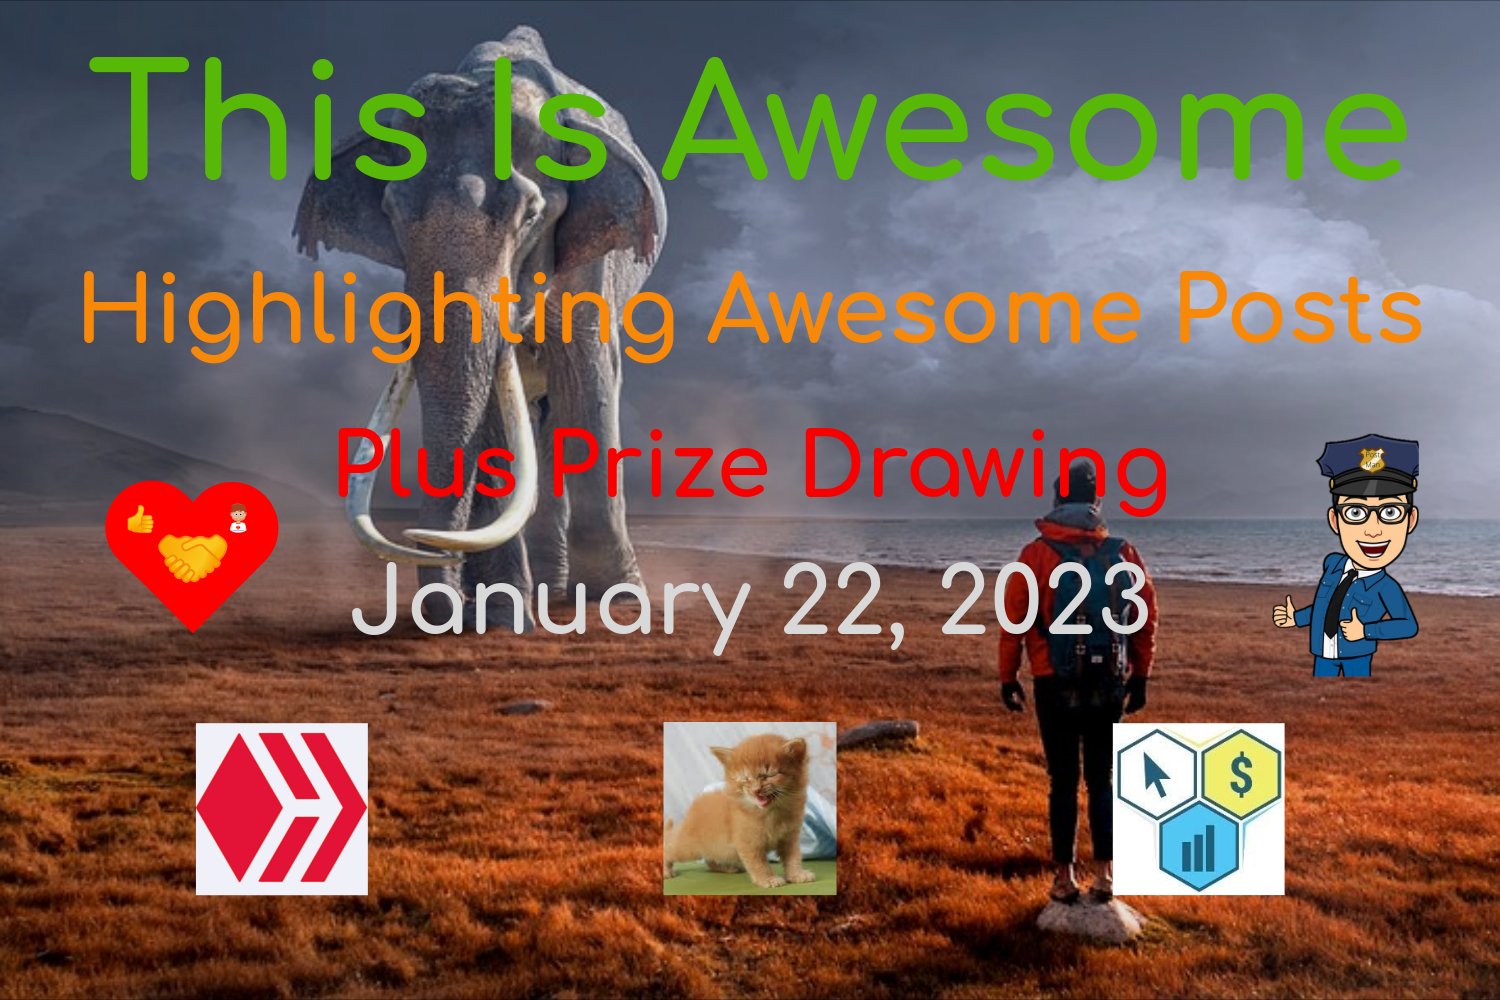 @thisisawesome/this-is-awesome-highlighting-awesome-posts-plus-prize-drawing-january-22-2023